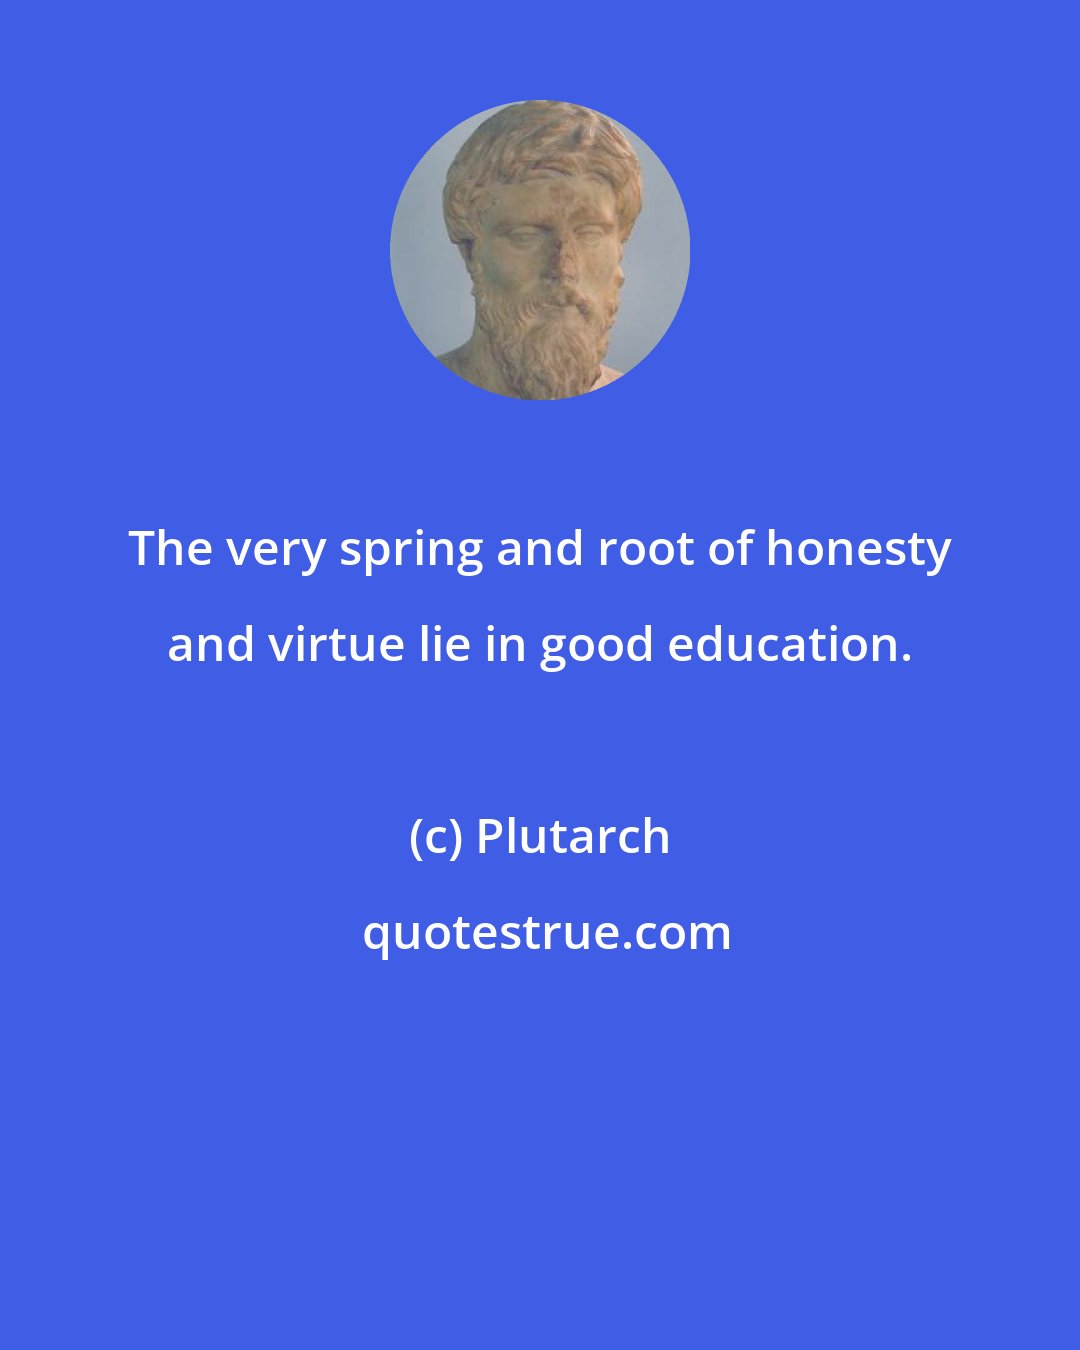 Plutarch: The very spring and root of honesty and virtue lie in good education.